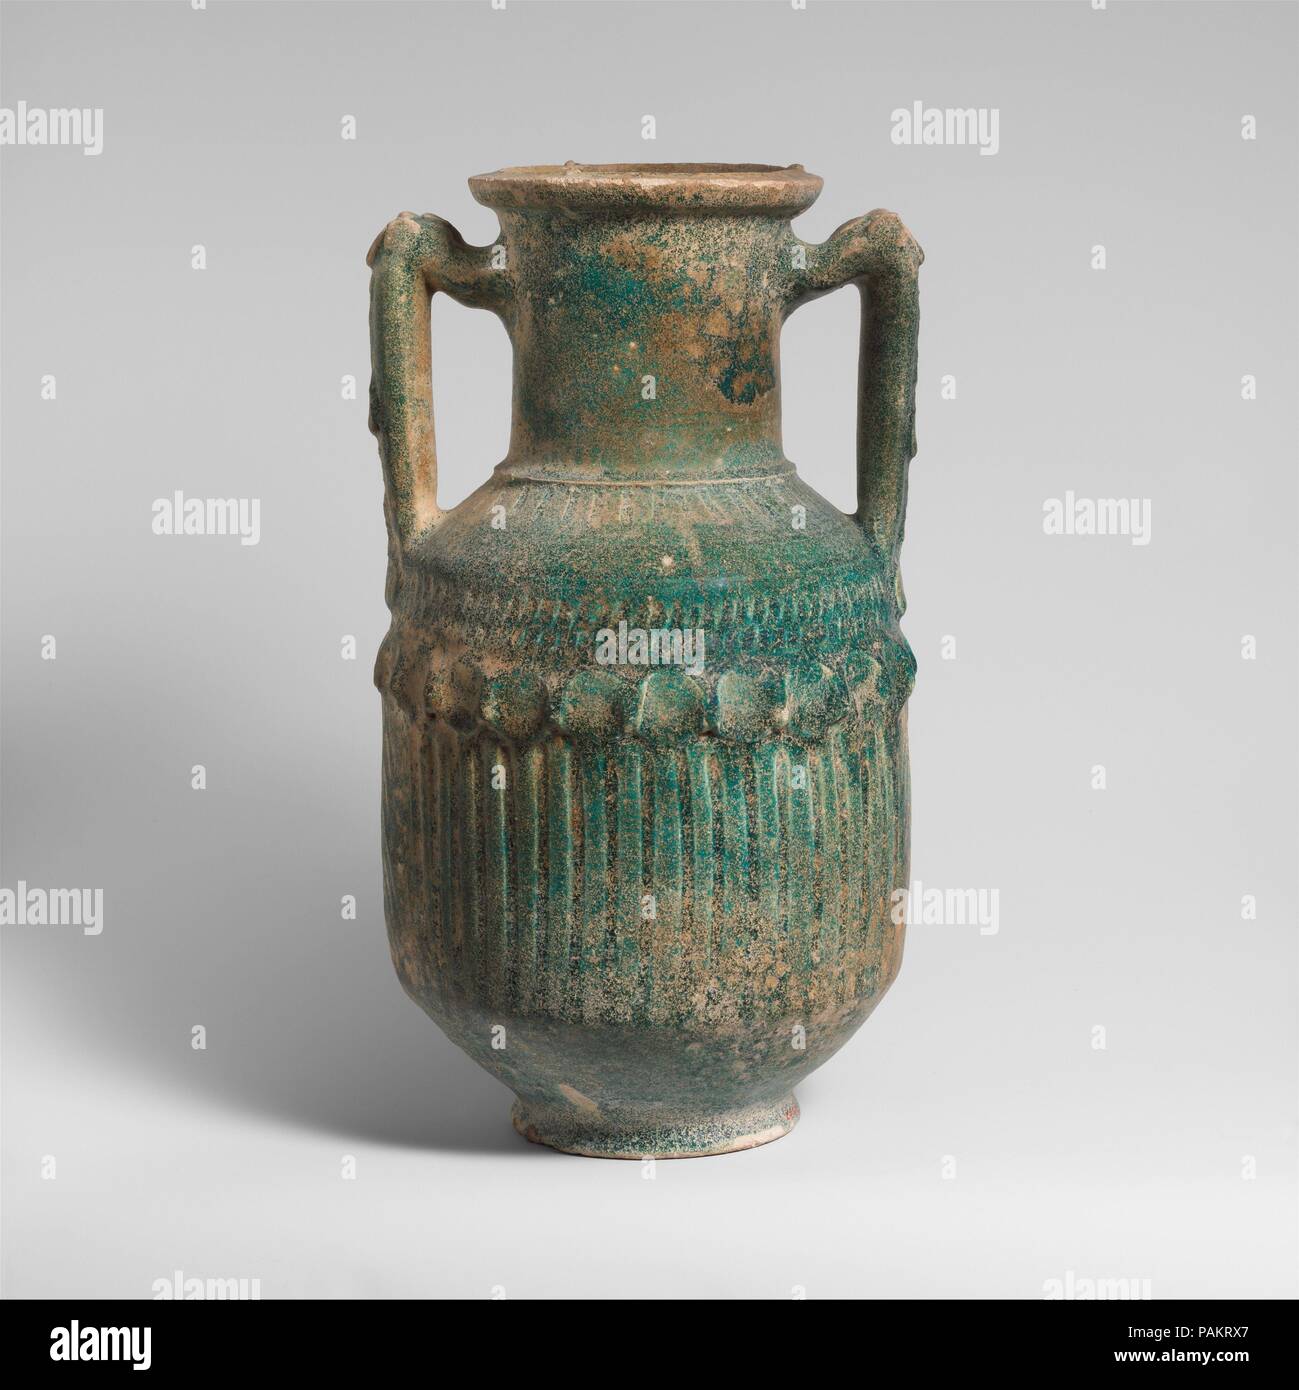 Terracotta amphora (two-handled jar). Culture: Roman, Syrian. Dimensions: 12 3/8in. (31.5cm). Date: ca. A.D. 100-225.  Probably made at Dura-Europos. Museum: Metropolitan Museum of Art, New York, USA. Stock Photo